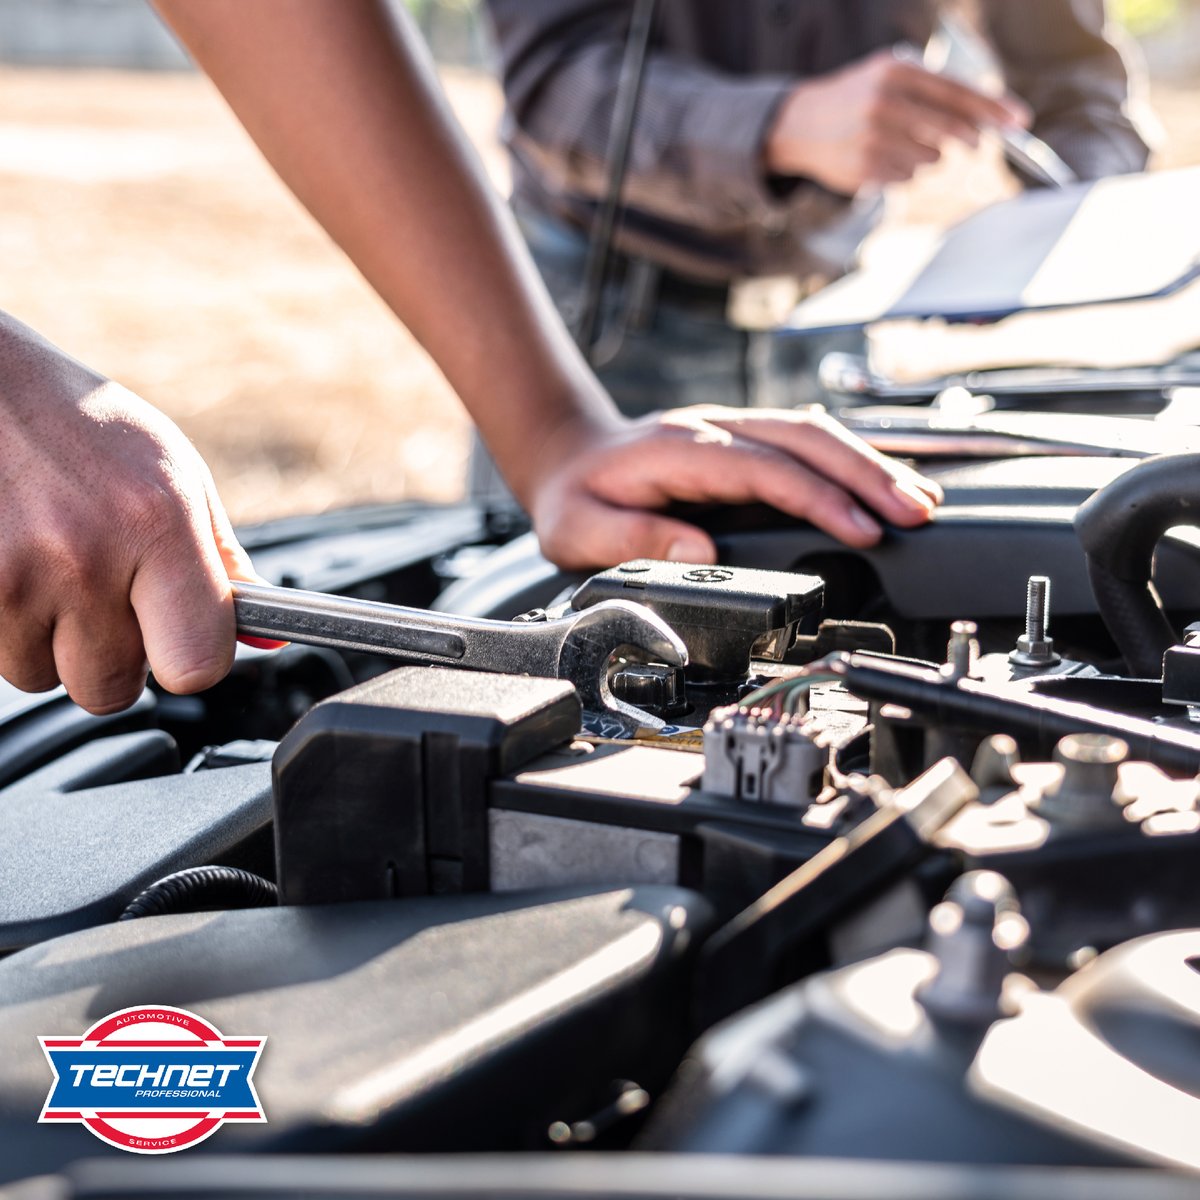 Locally owned, professionally operated.

We are here to keep your family safe on the road. Stop by Daddario Tire and Auto Service today for all of your car repair needs.

#TechNetNation #TechNetPros #ServiceLocal